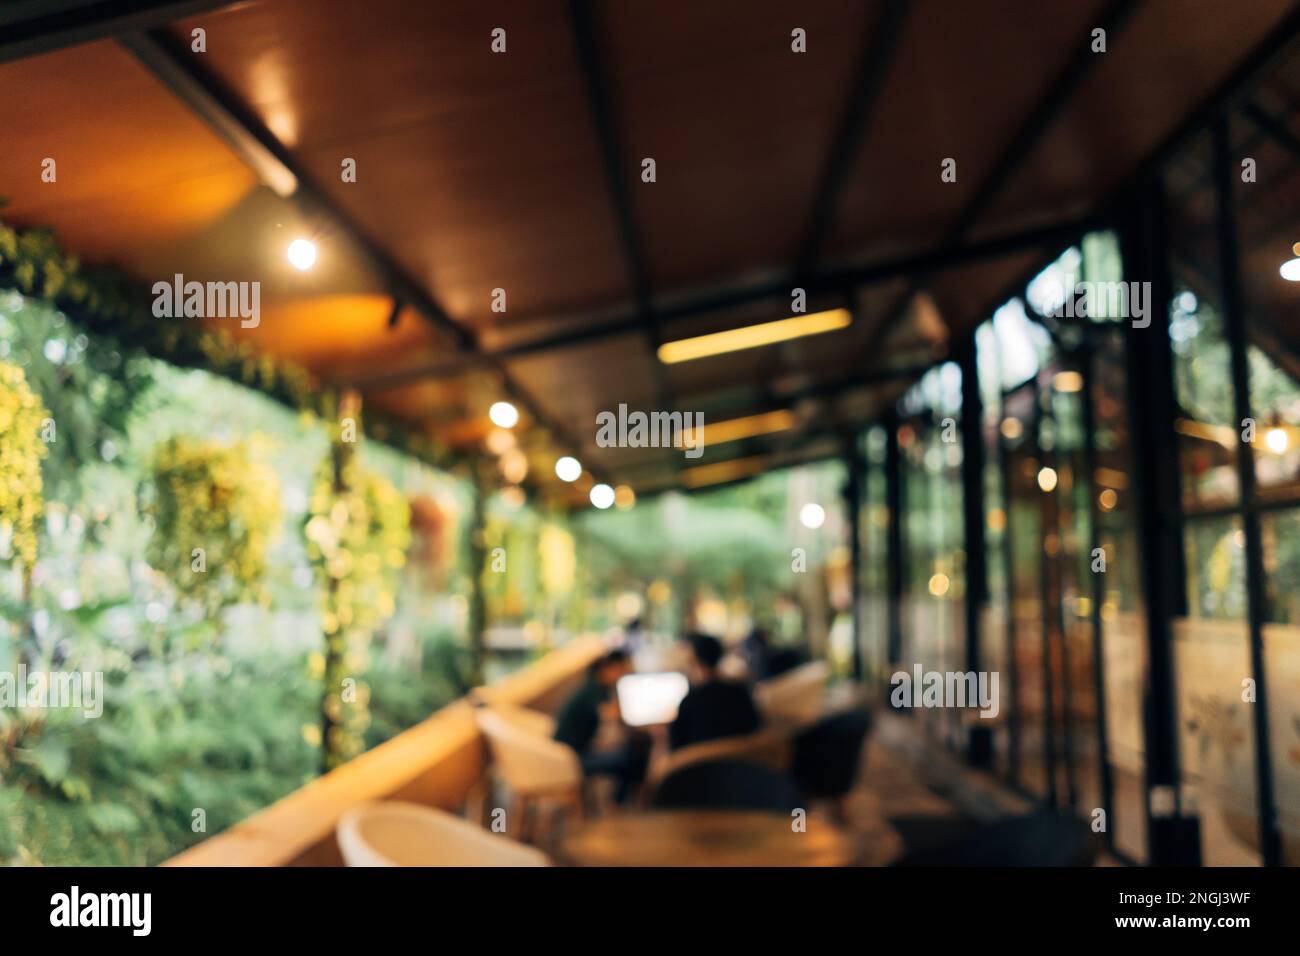 blurred defocus outdoor restaurant cafe with green environment and tungsten warm lamp bulb lights decoration. Stock Photo